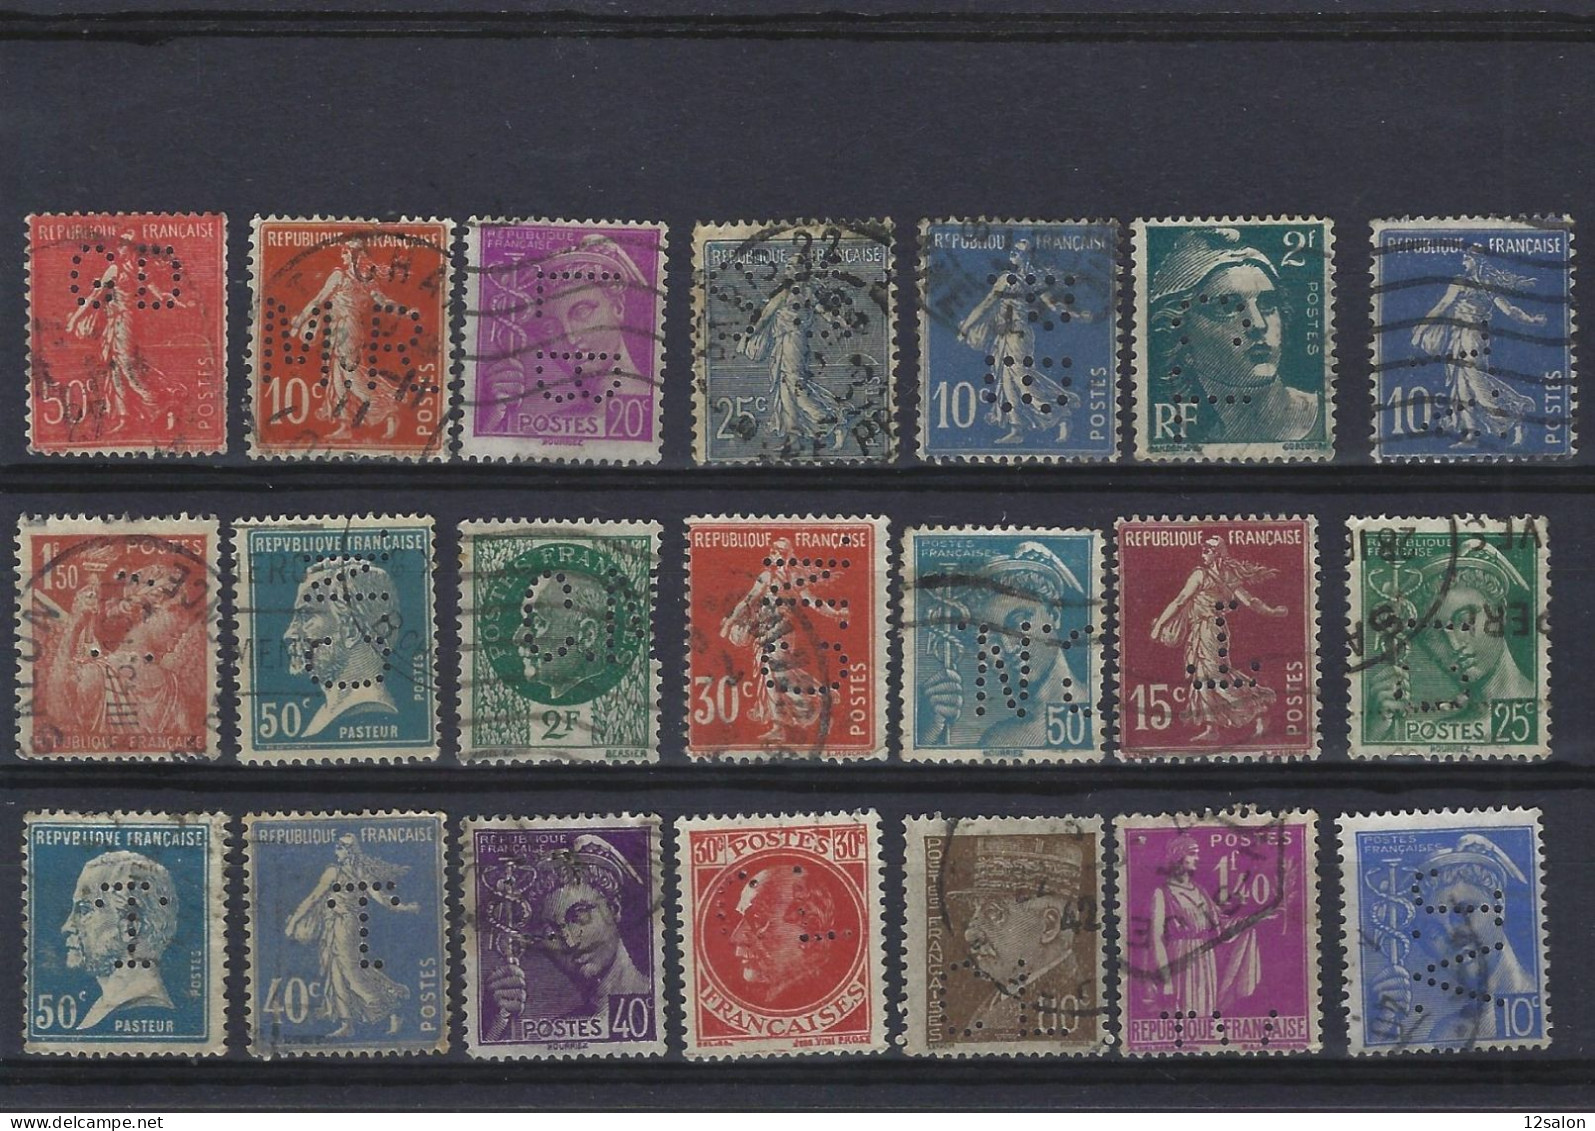 FRANCE TIMBRE LOT 2 PERFORE PERFORES PERFIN PERFINS PERFO PERFORATION PERFORIERT - Gebraucht